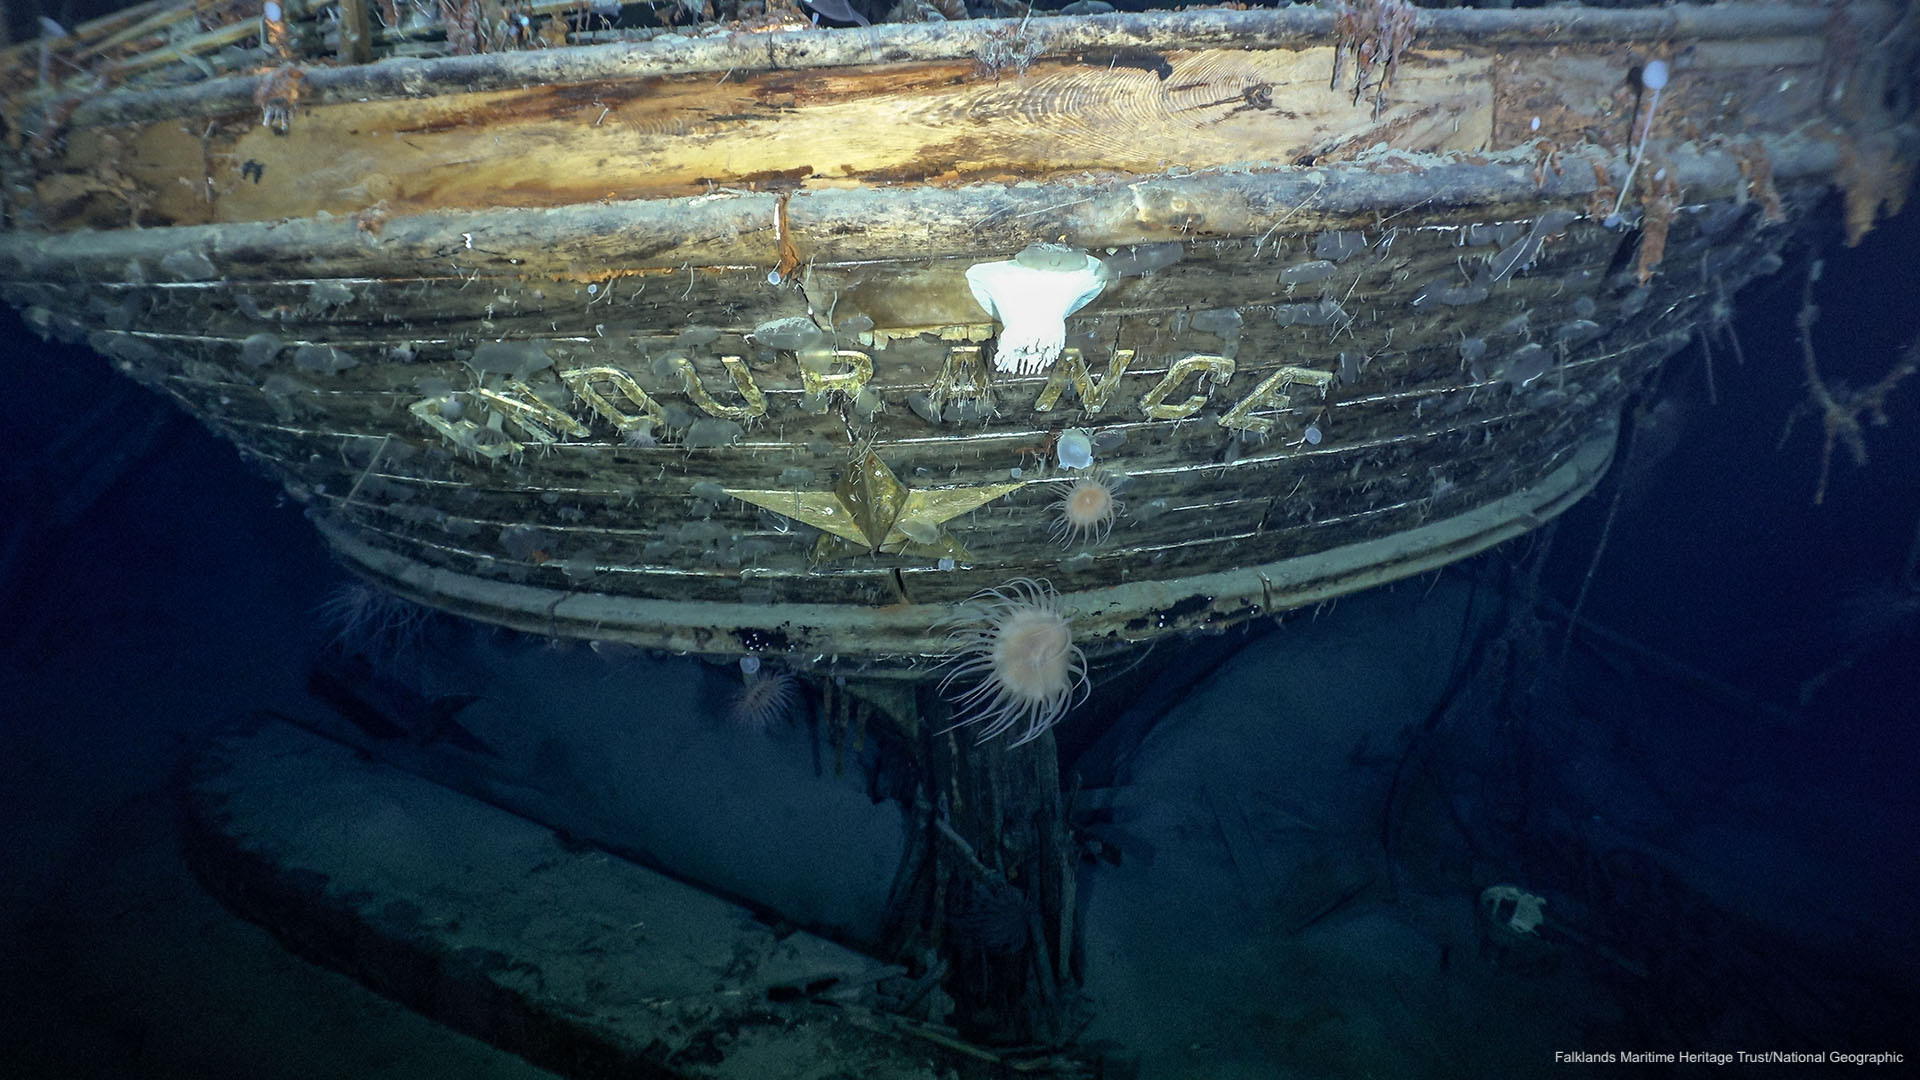 The stern of Endurance with the name and emblematic polestar (image: Falklands Maritime Heritage Trust / National Geographic)